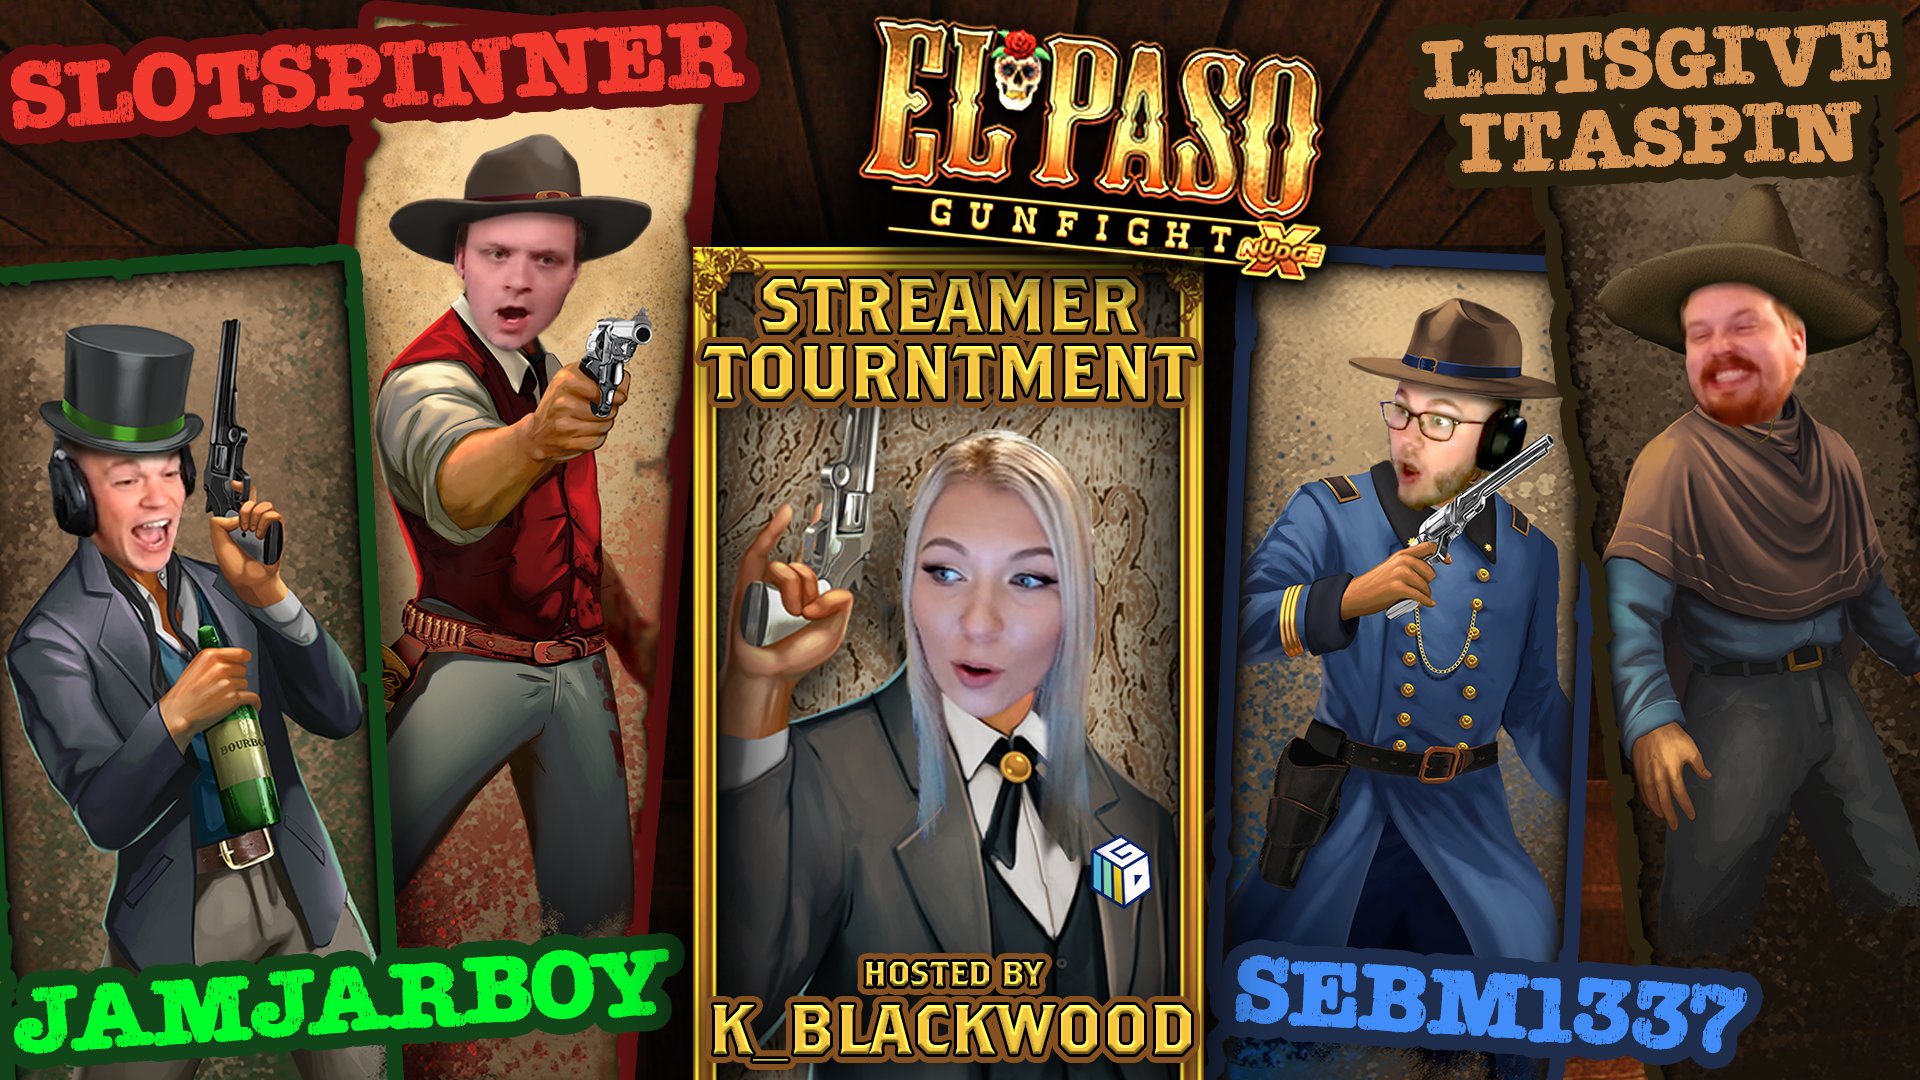 CasinoGrounds on Twitter: "El Paso Gunfight xNudge - Streamer Tournament!  Four Streamers - One Winner Watch all 4 streams at the same time +  commentary at our CasinoGroundsTV Twitch channel. Tonight: 05/05/2021